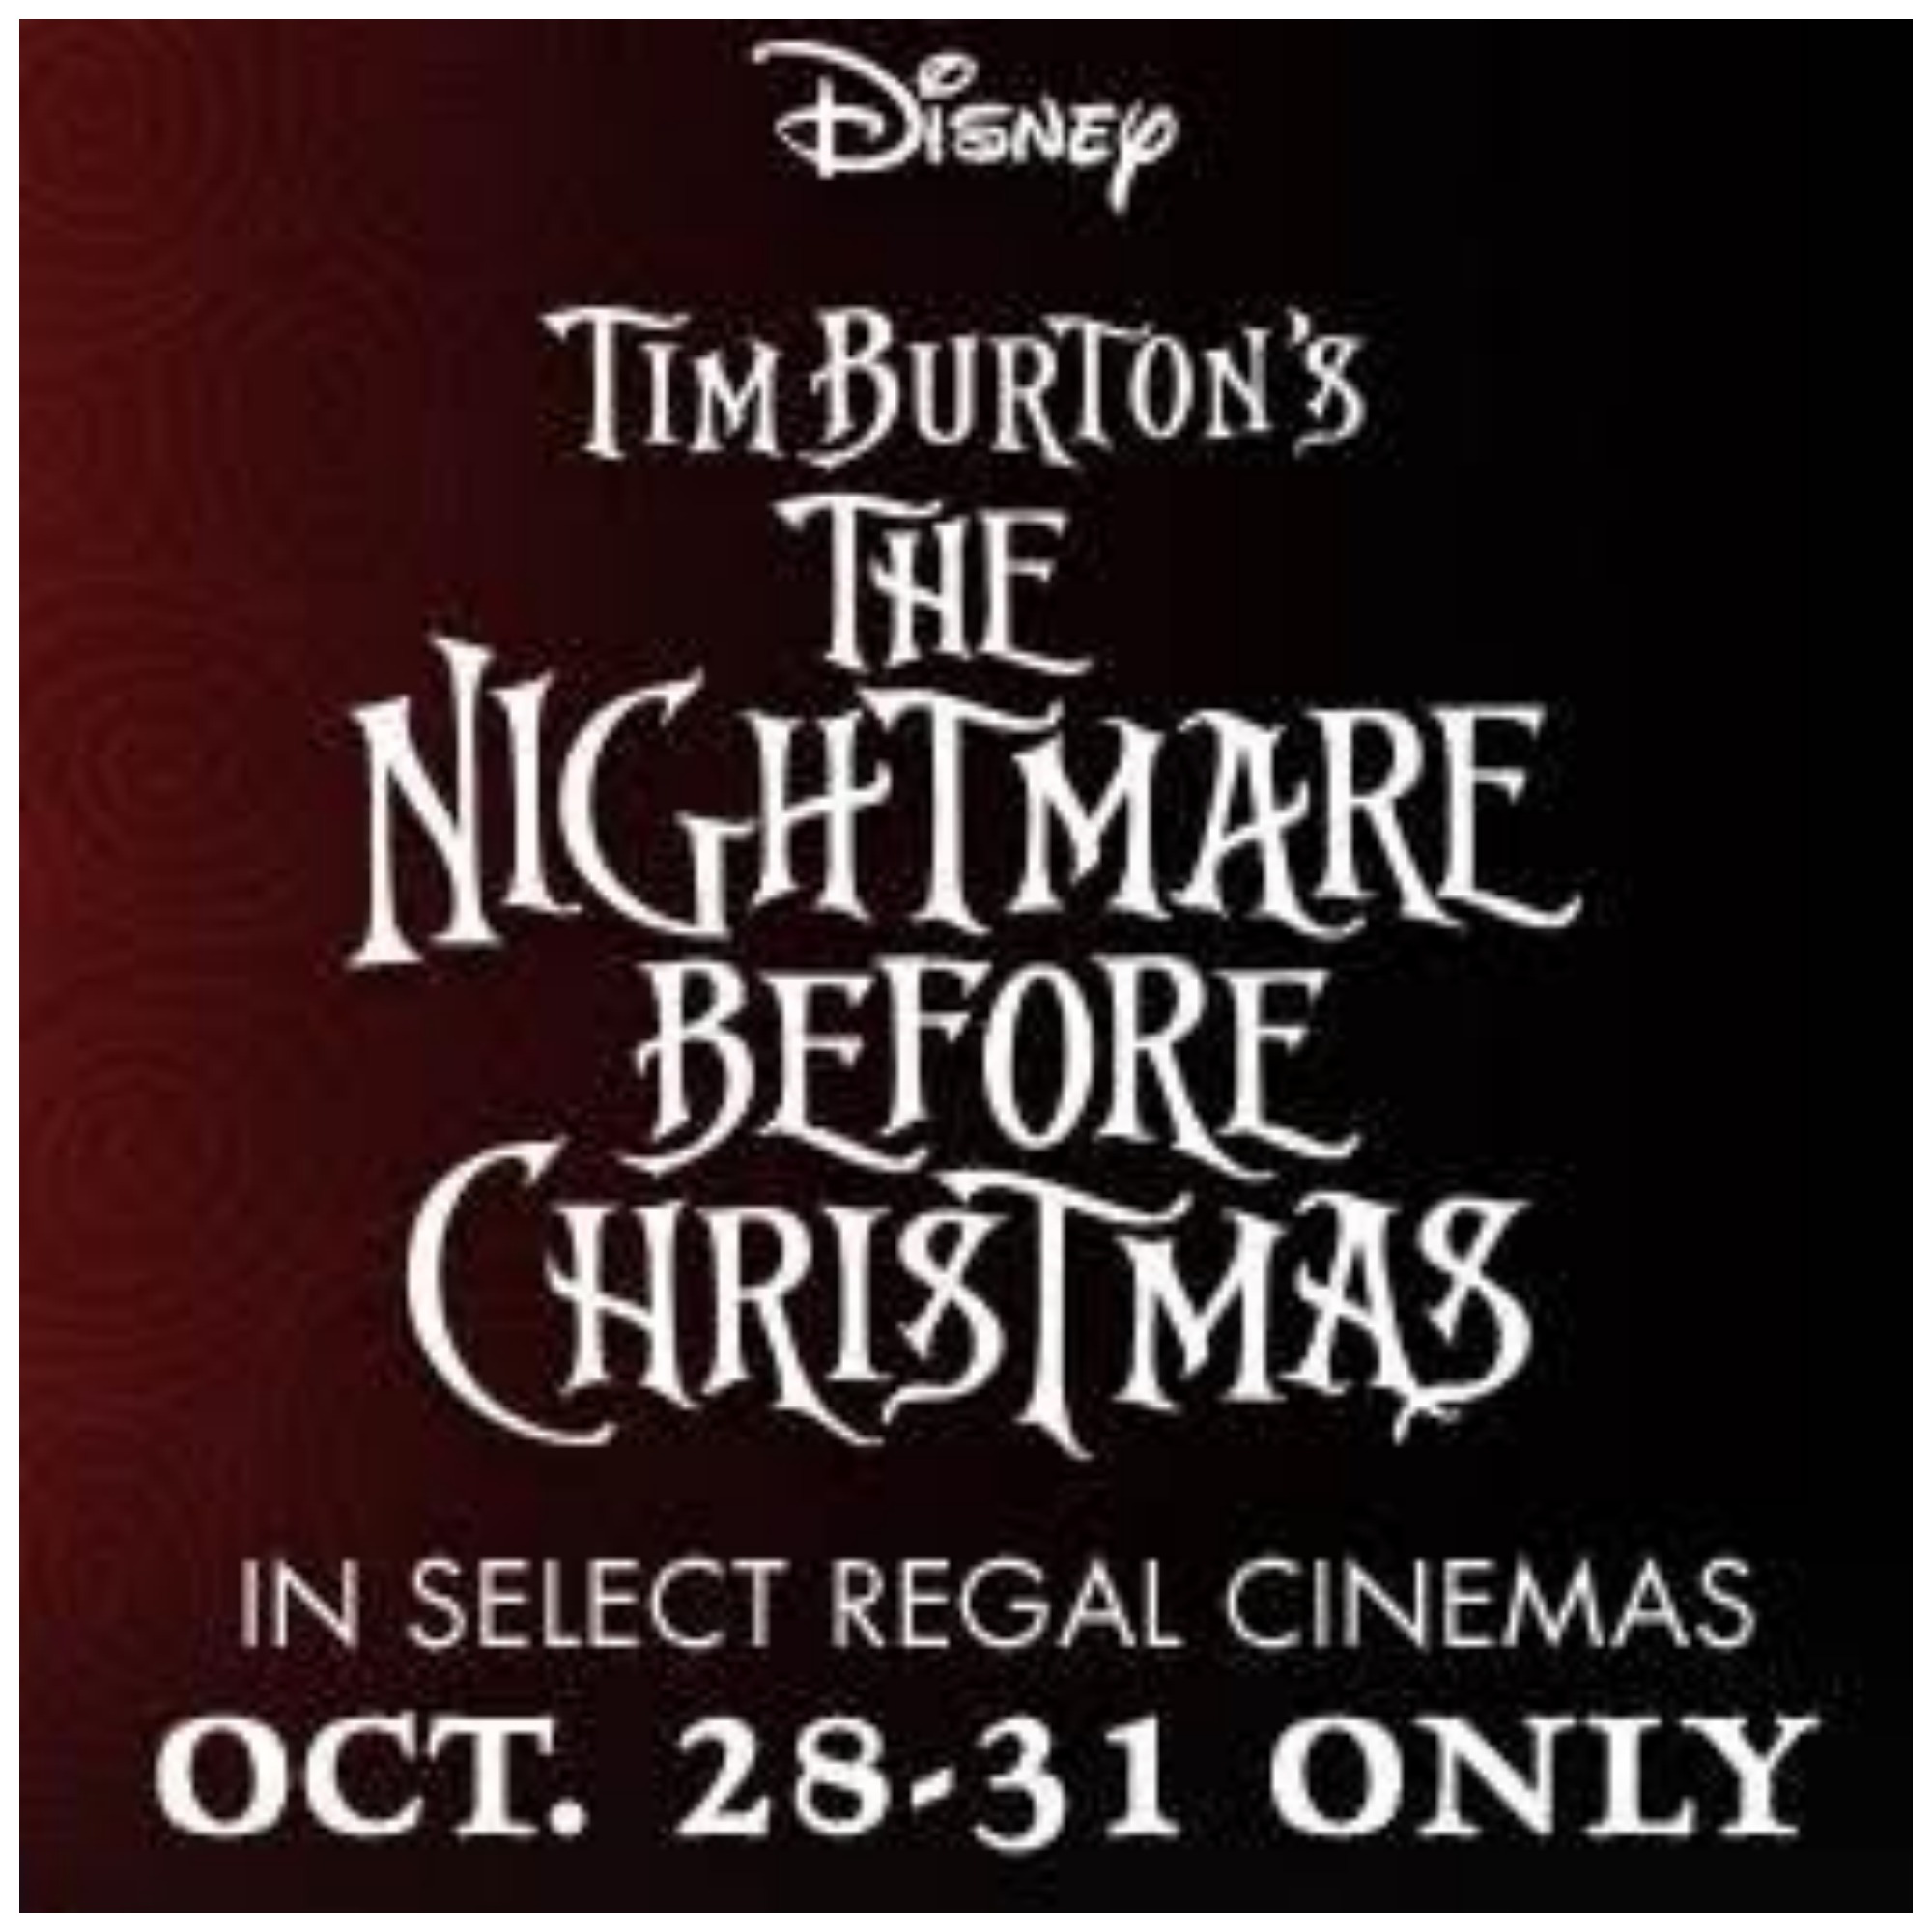 The Nightmare Before Christmas Returns to Theaters this Halloween Weekend!